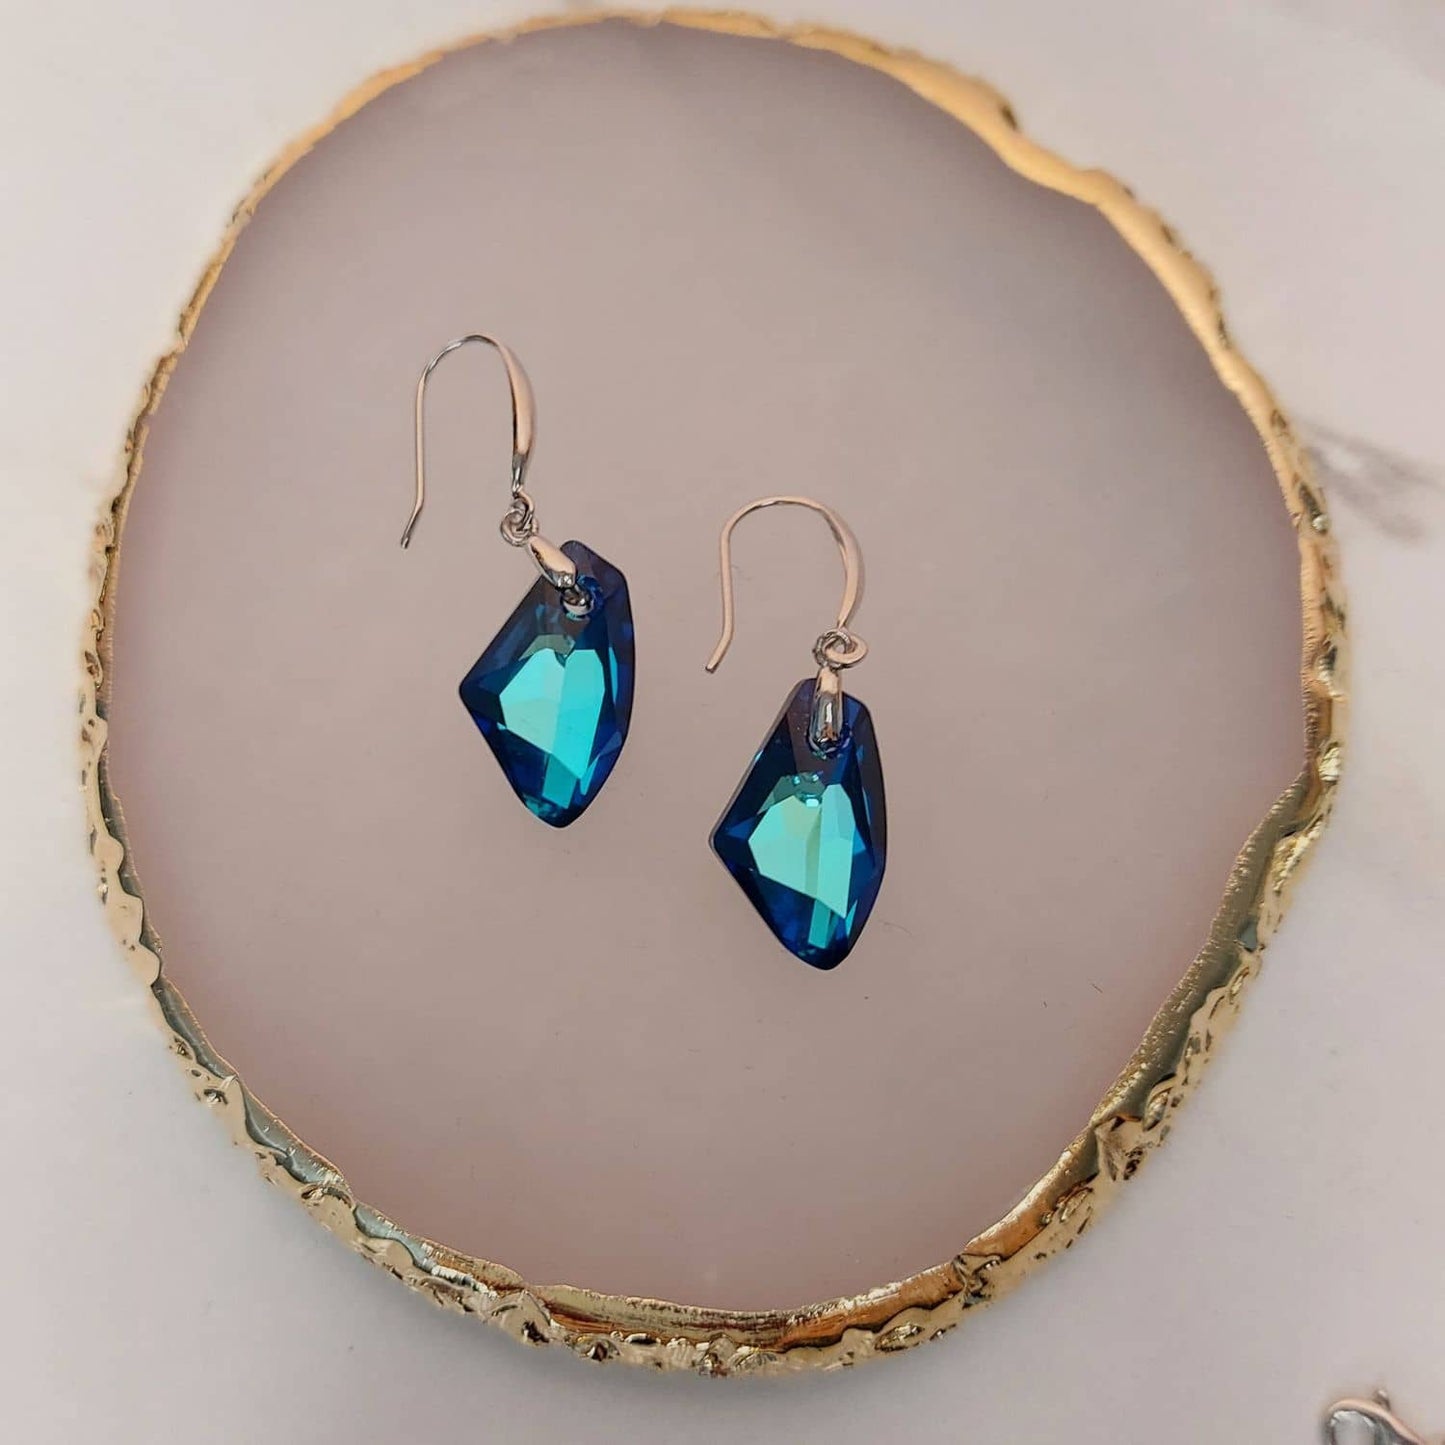 Classy Bermuda Blue Haven Earrings with Austrian Crystals